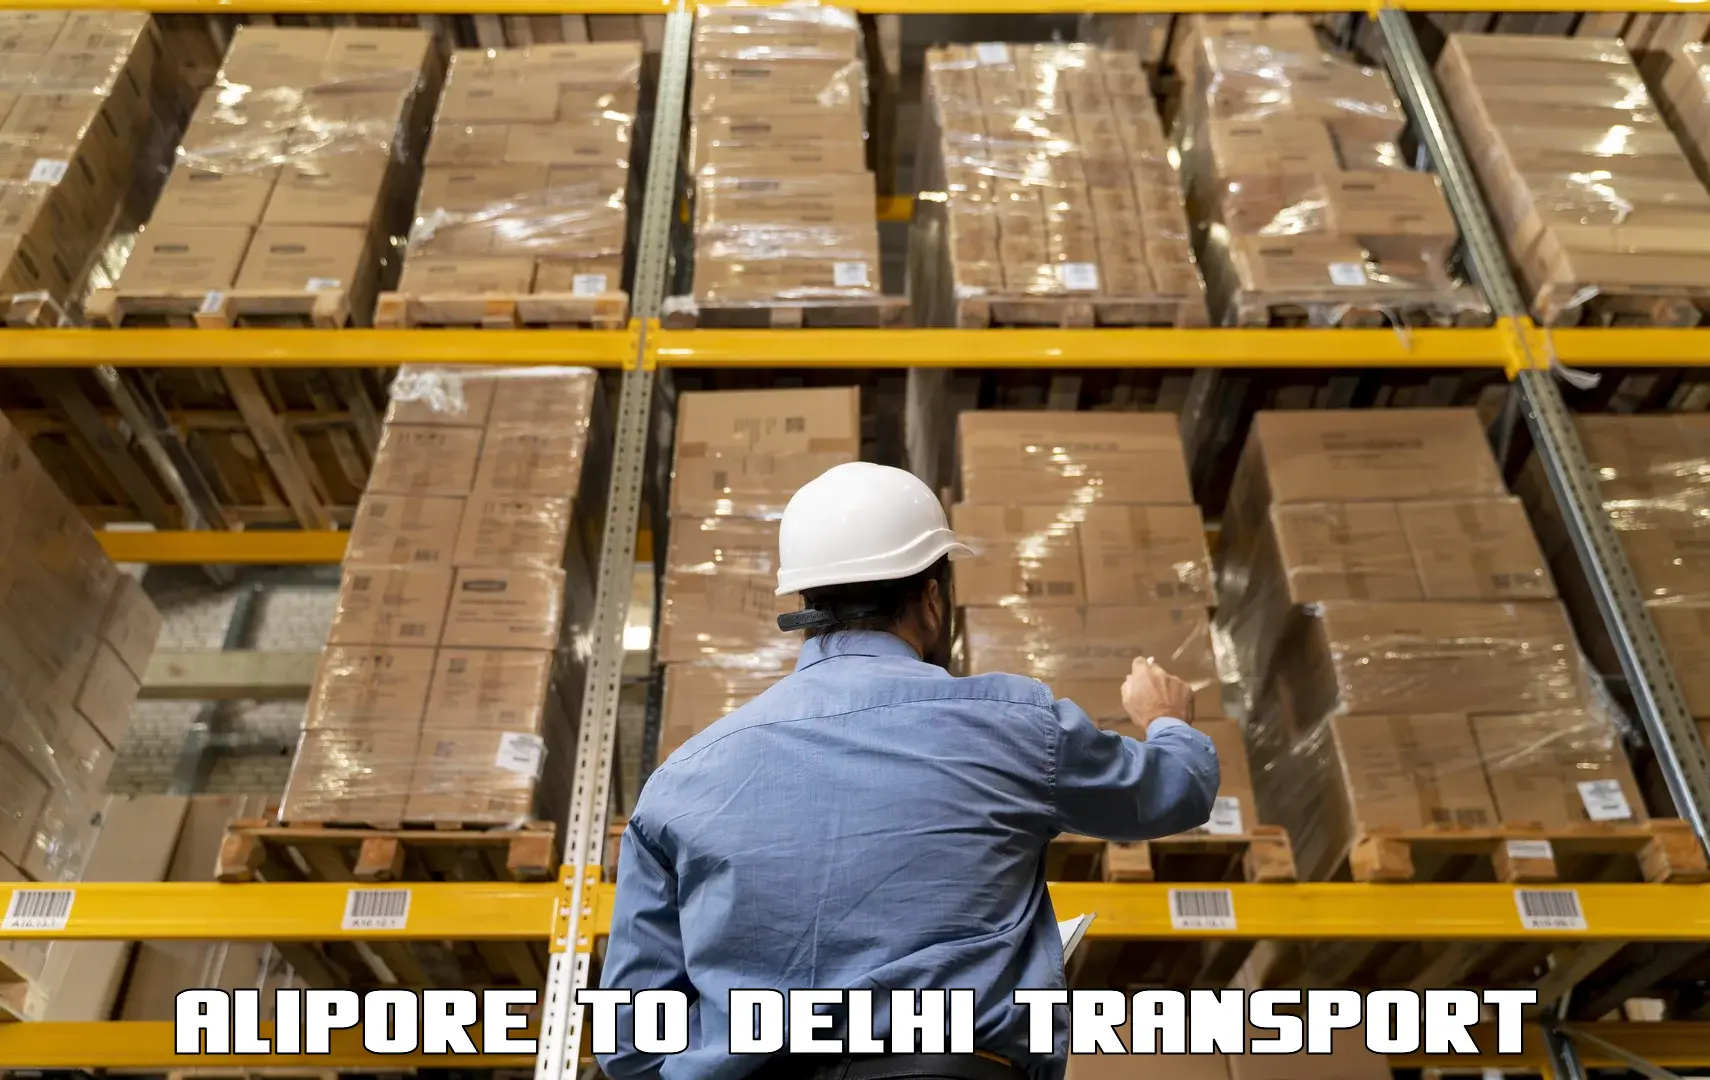 Truck transport companies in India Alipore to NCR